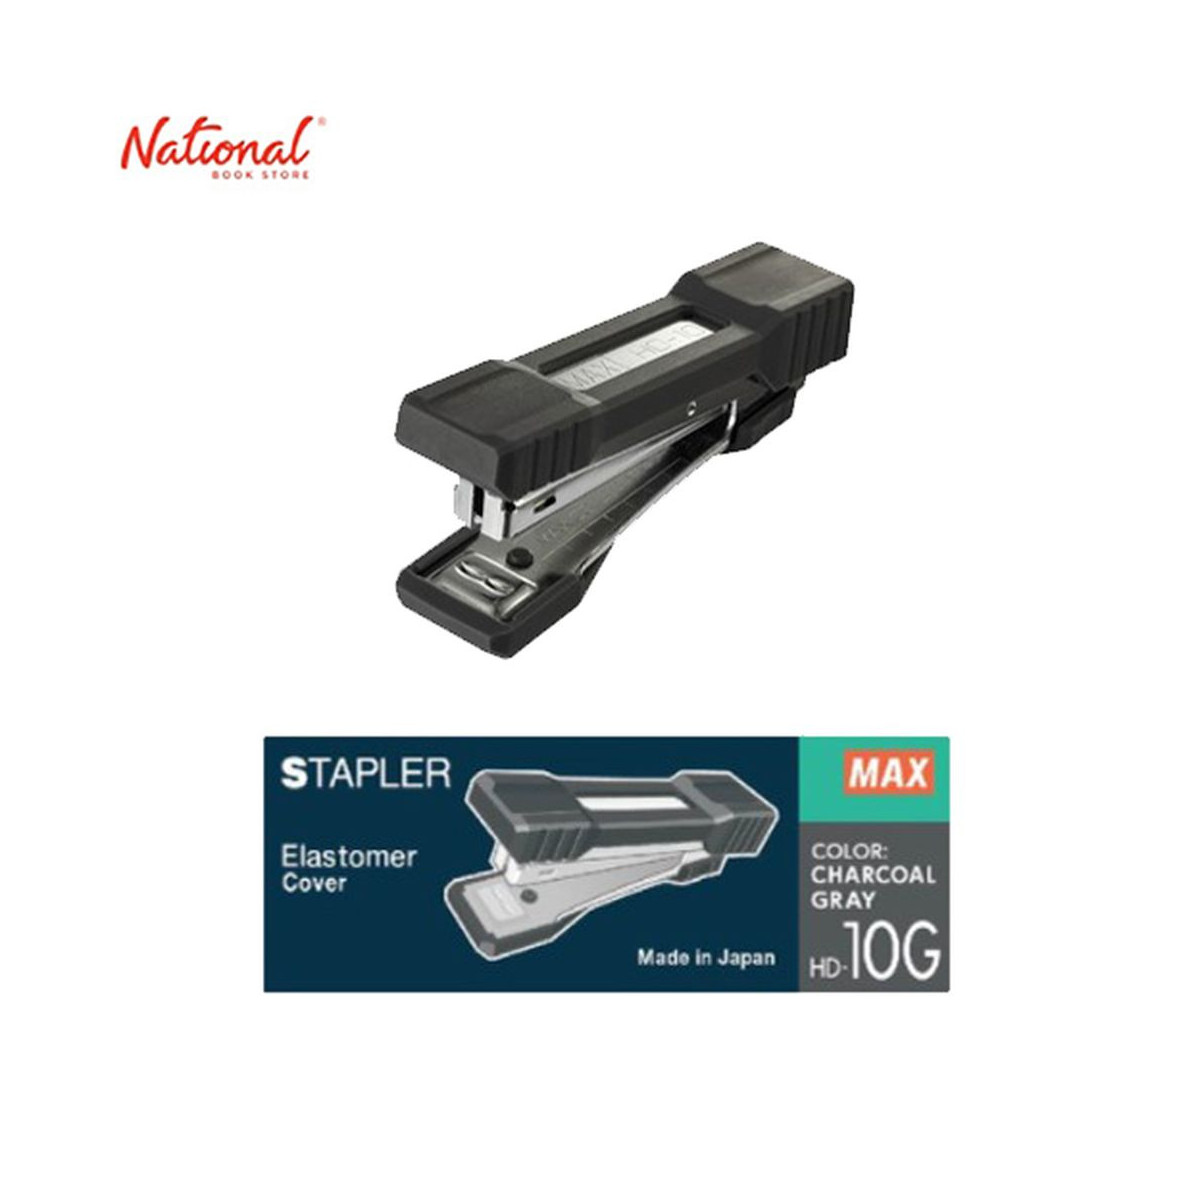 Max Stapler No.10 with Remover Soft Grip 20Sheets Charcoal Gray HD-10G